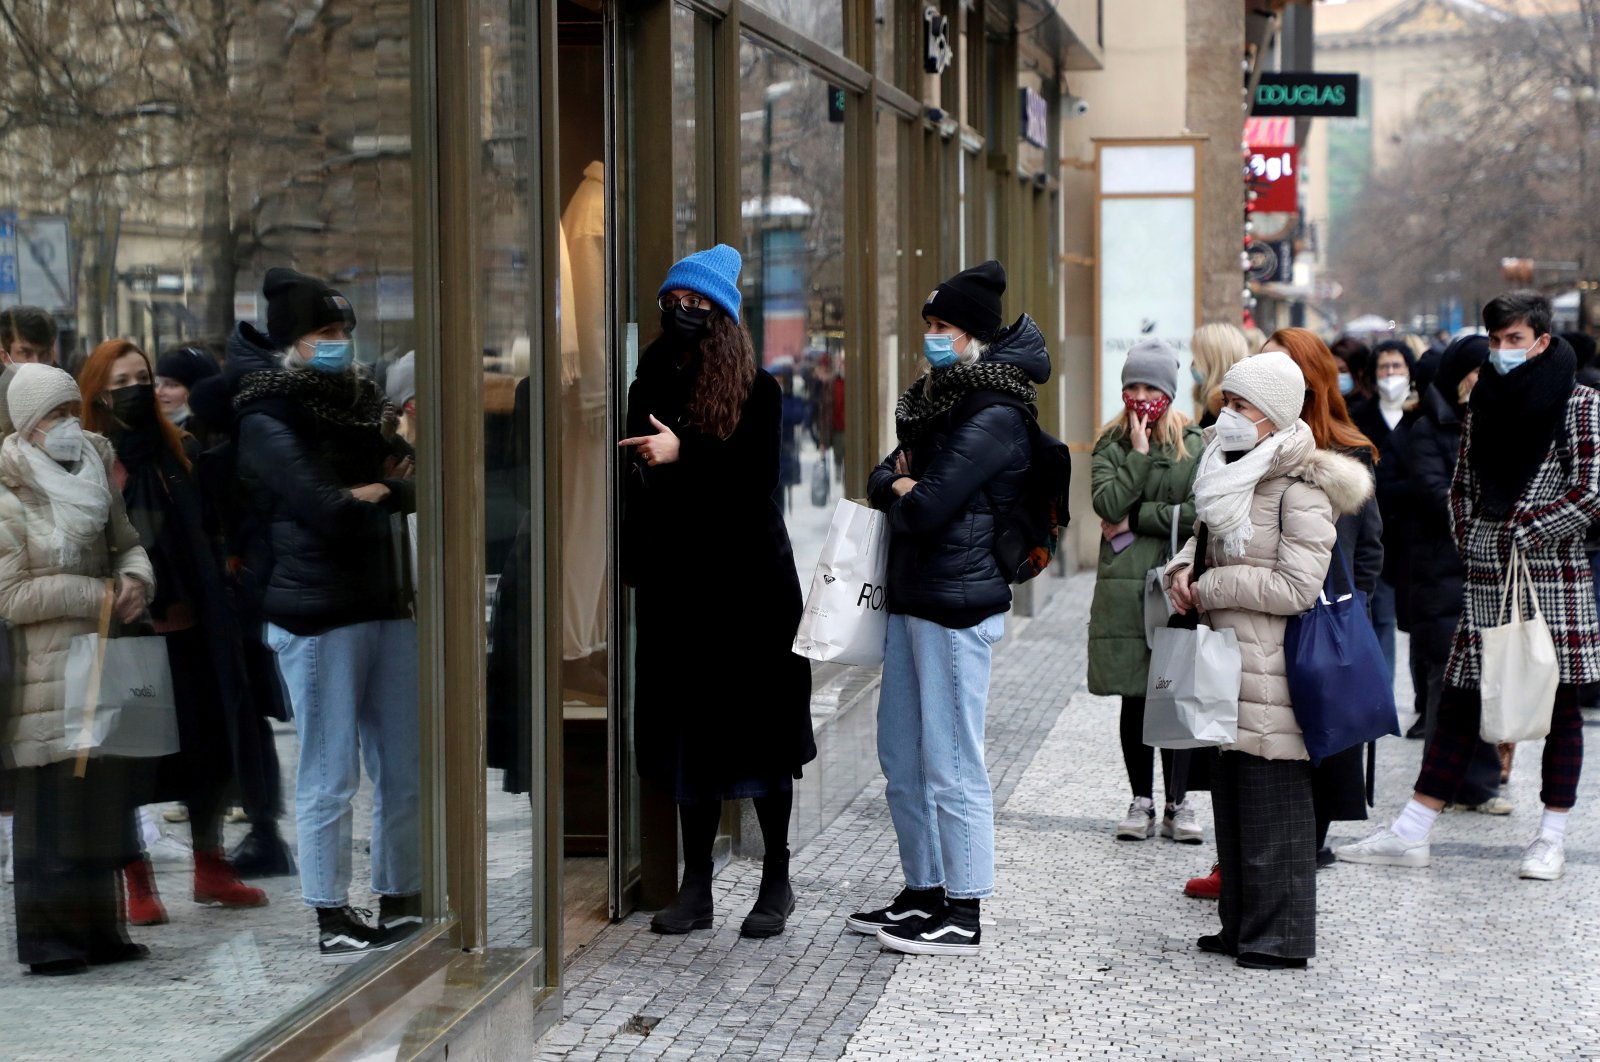 Customers queue in front of the reopened shop, as restrictions ease following the coronavirus outbreak in Prague, Czech Republic, Dec. 3, 2020. (Reuters Photo)